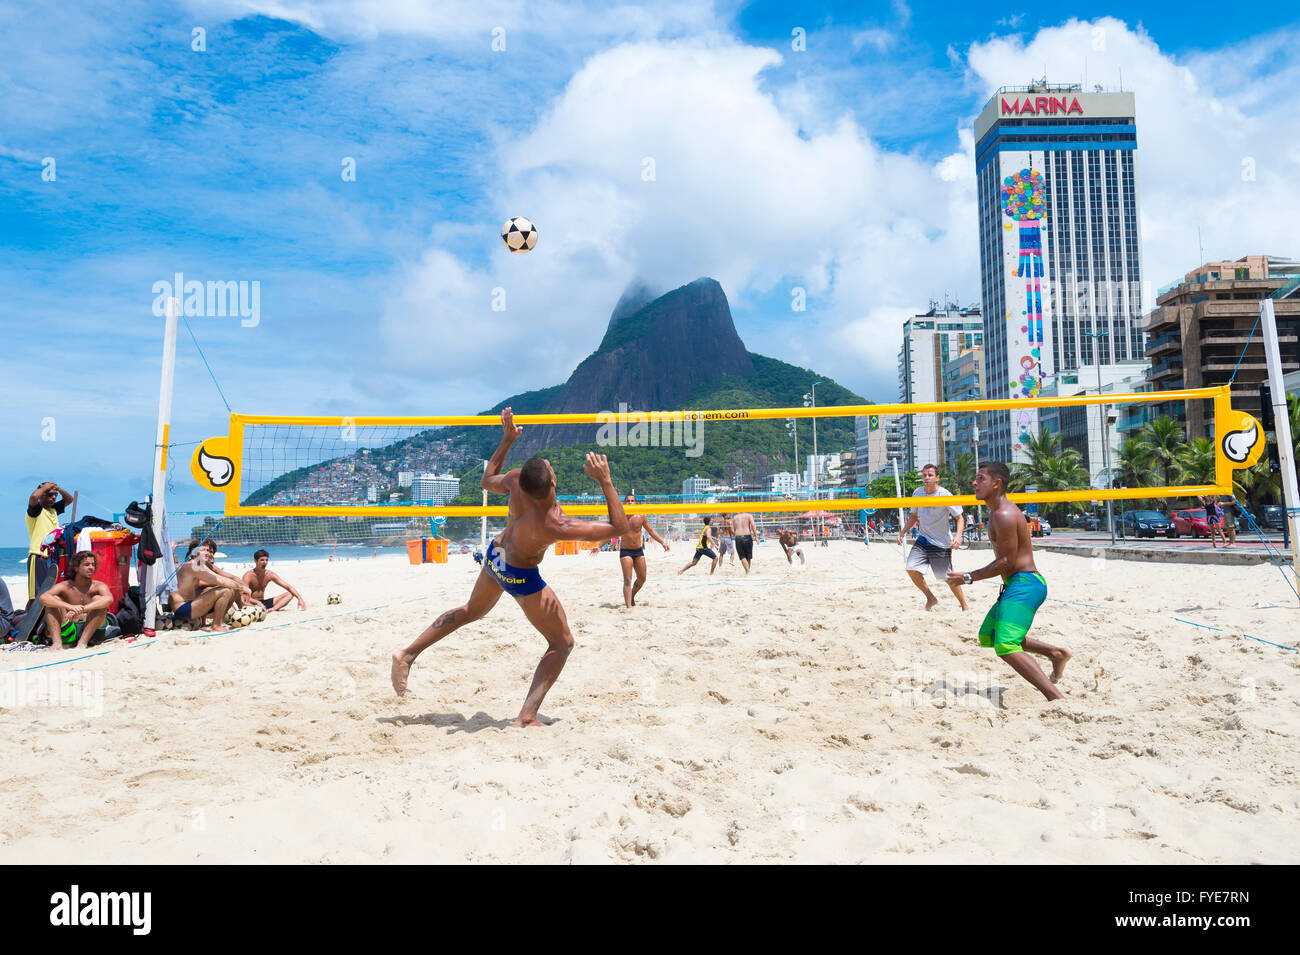 RIO DE JANEIRO - MARCH 17, 2016: Brazilians play a game of futevolei (footvolley), a sport that combines football and volleyball Stock Photo